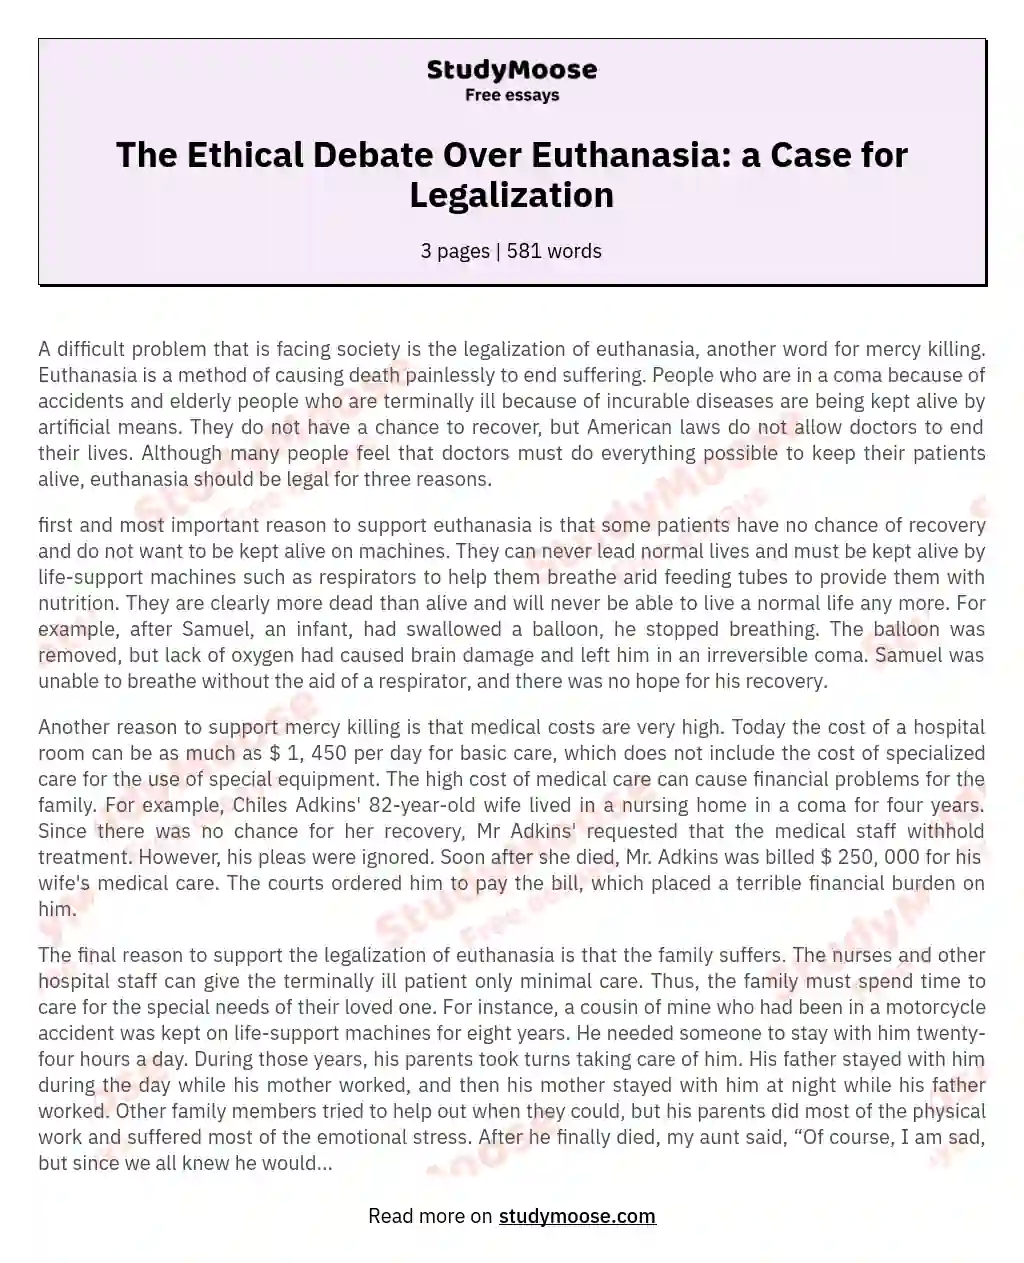 The Ethical Debate Over Euthanasia: a Case for Legalization essay